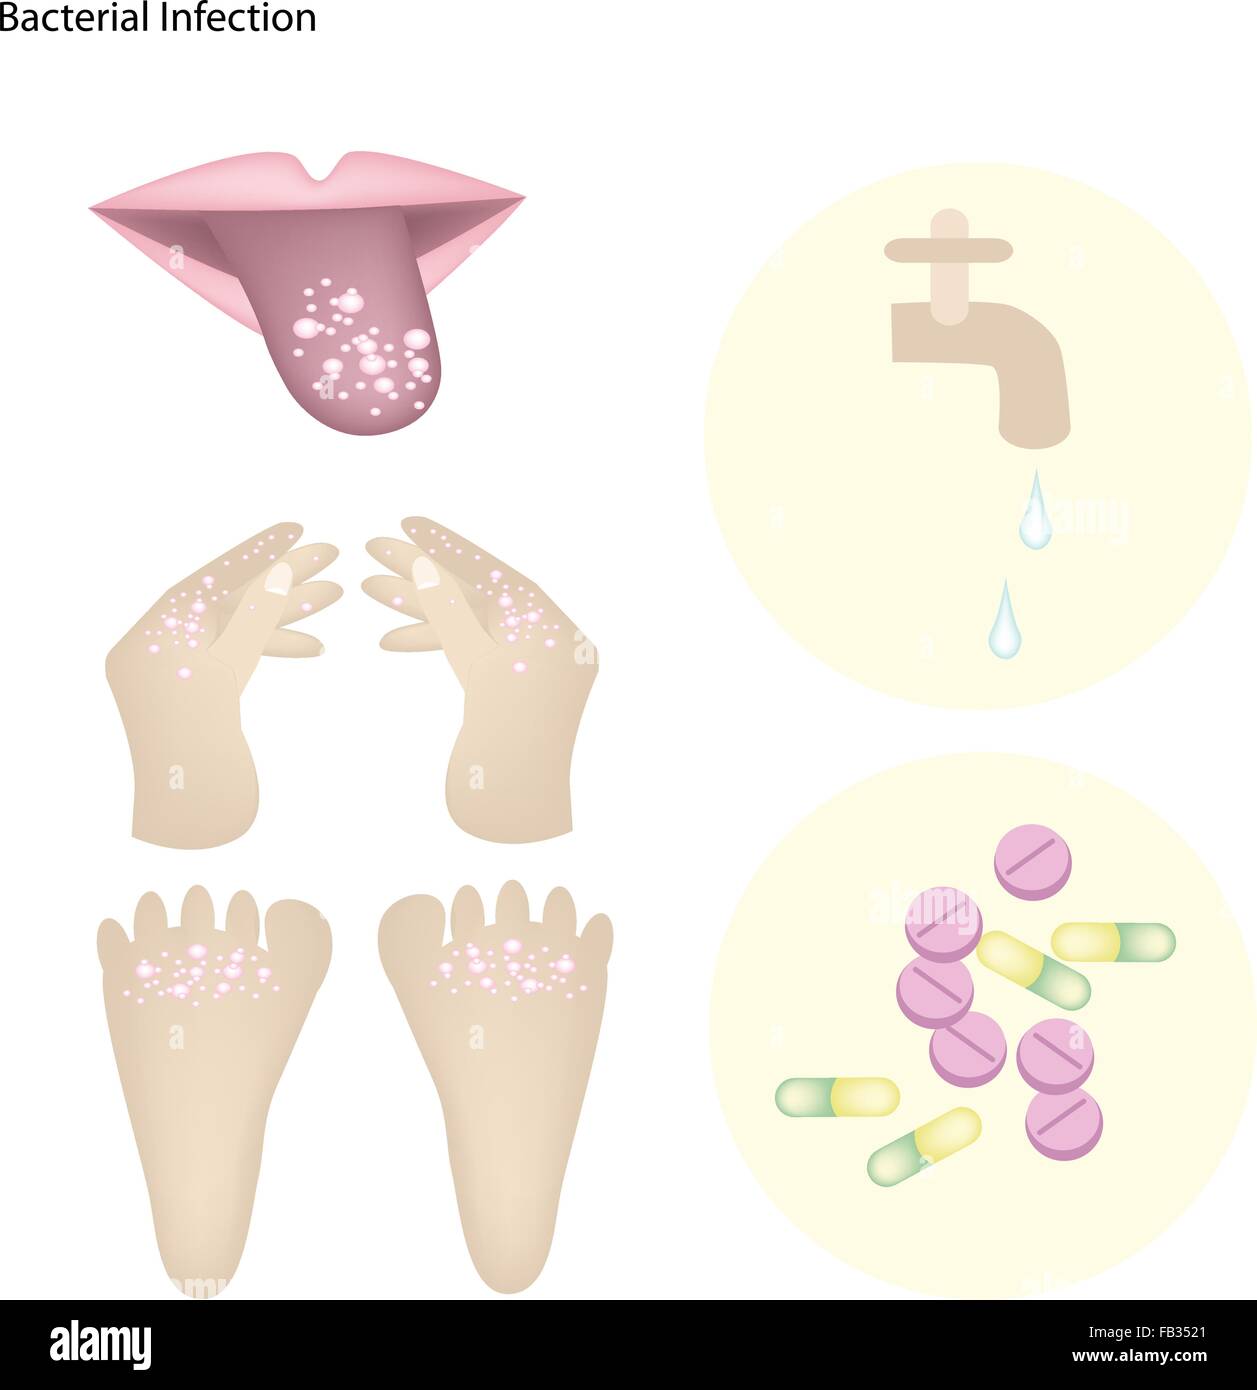 Medical Concept, Illustration of Bacterial Infection, Mouth, Palm and Foot With Part of The Treatment Process. Stock Vector